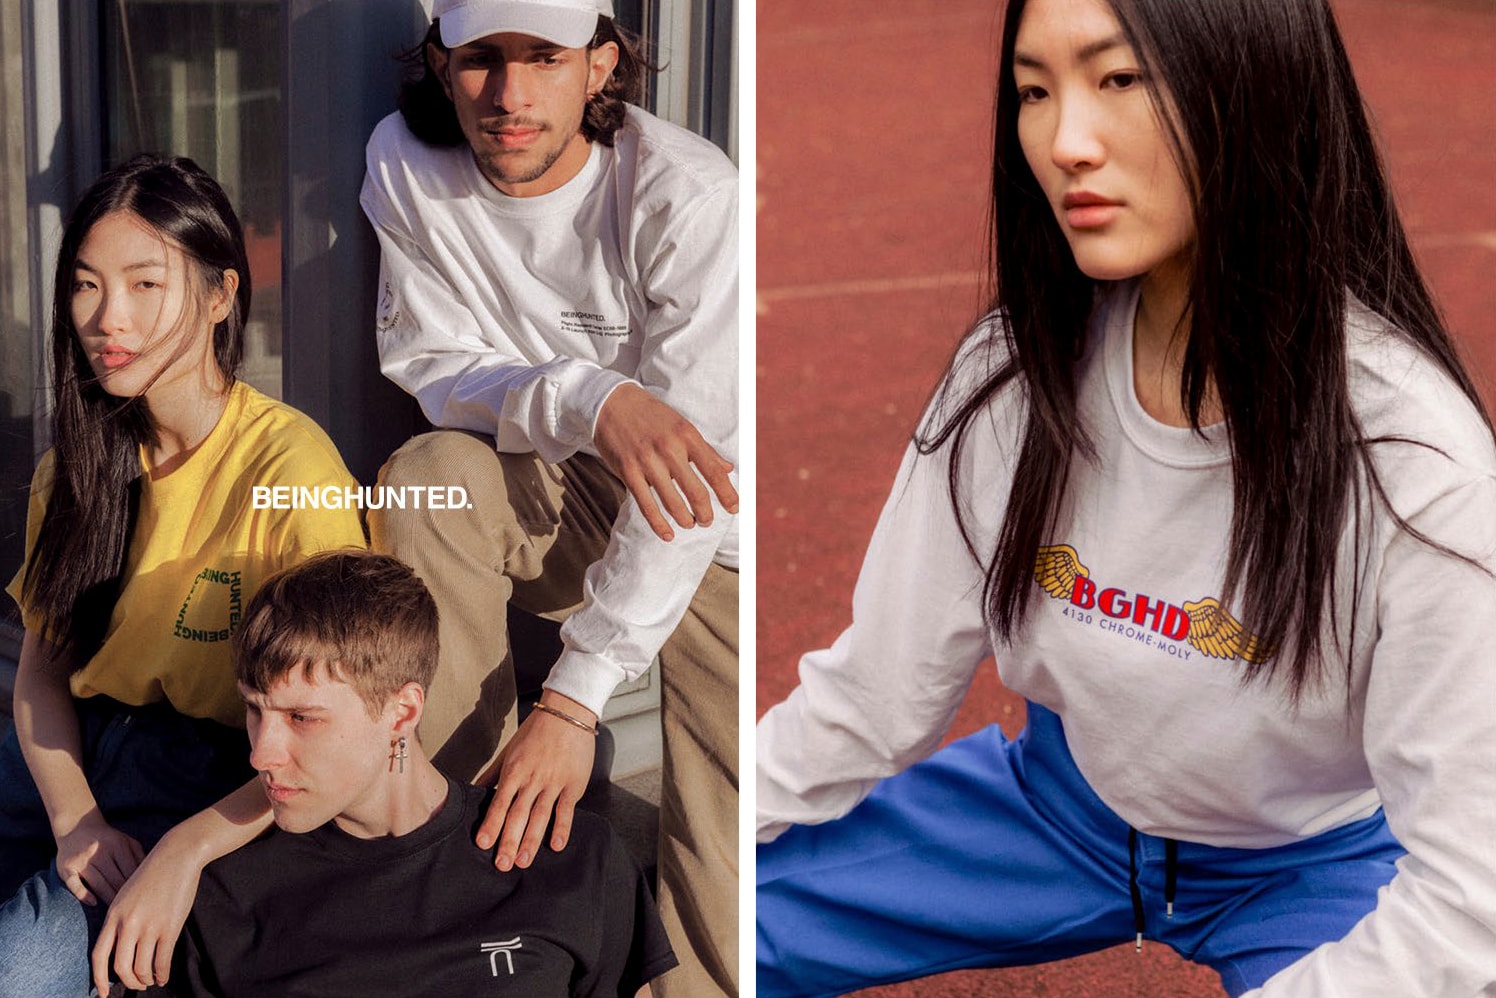 BEINGHUNTED. 2017 Spring/Summer Lookbook Graphic T-Shirts Berlin